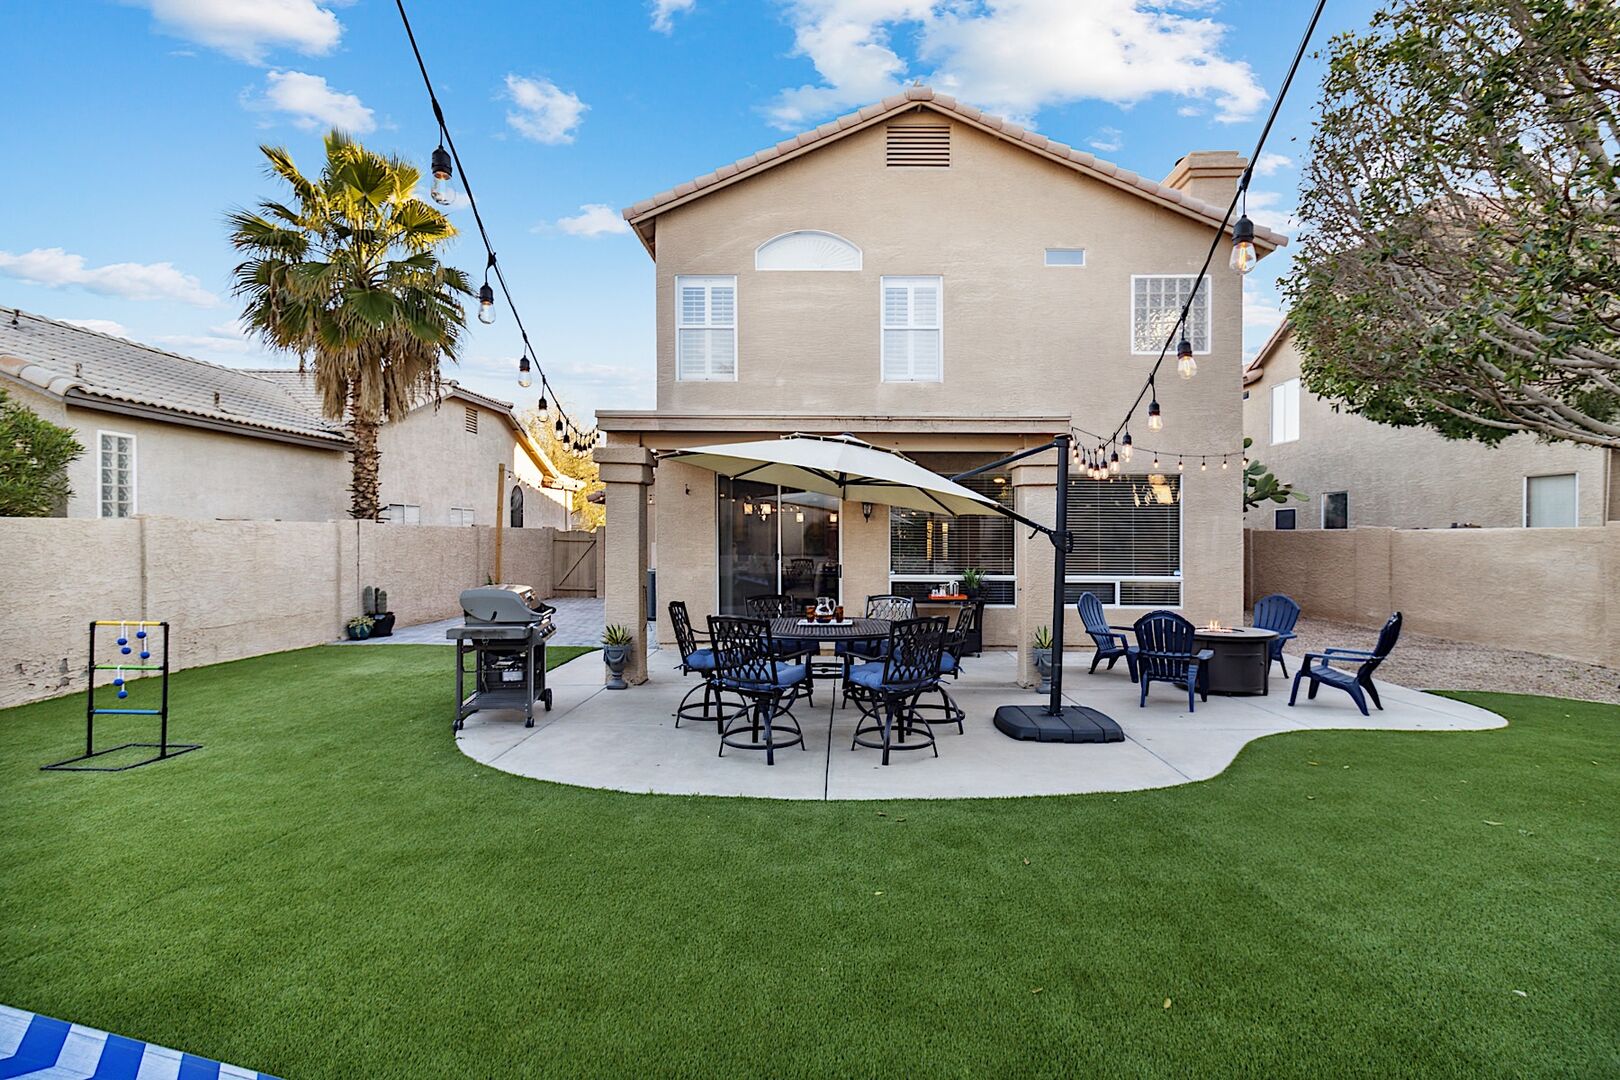 Great backyard for entertaining! BBQ Grill, Outdoor Dining Table, Fire Pit, & Yard Games like Corn Hole, Ladder Ball & Jenga!